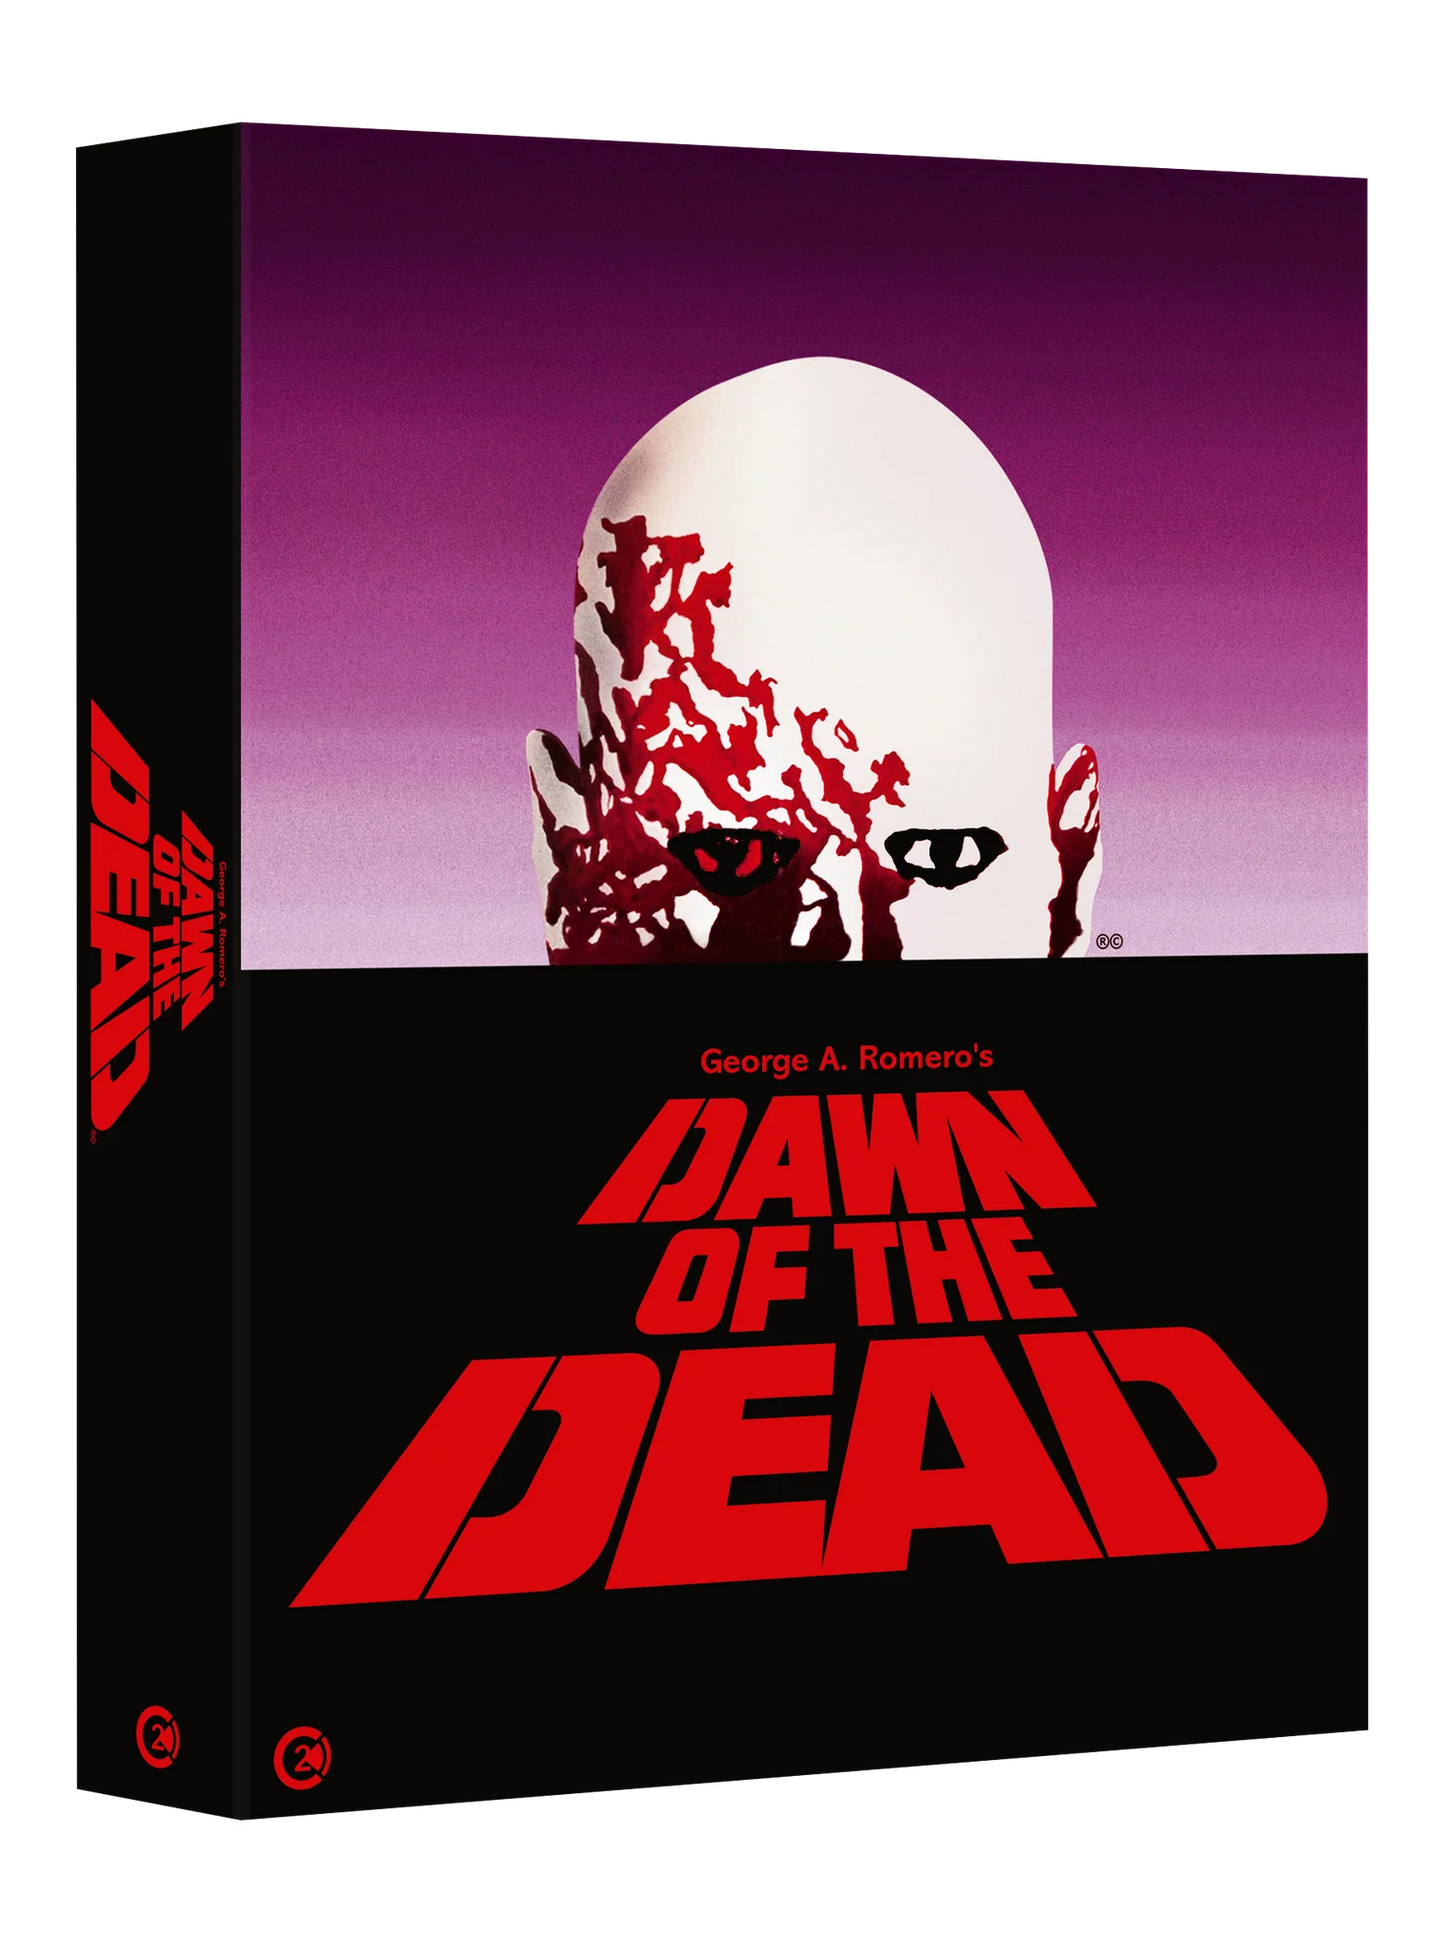 Dawn of the Dead Second Sight Films 4K UHD [NEW] [SLIPCOVER]